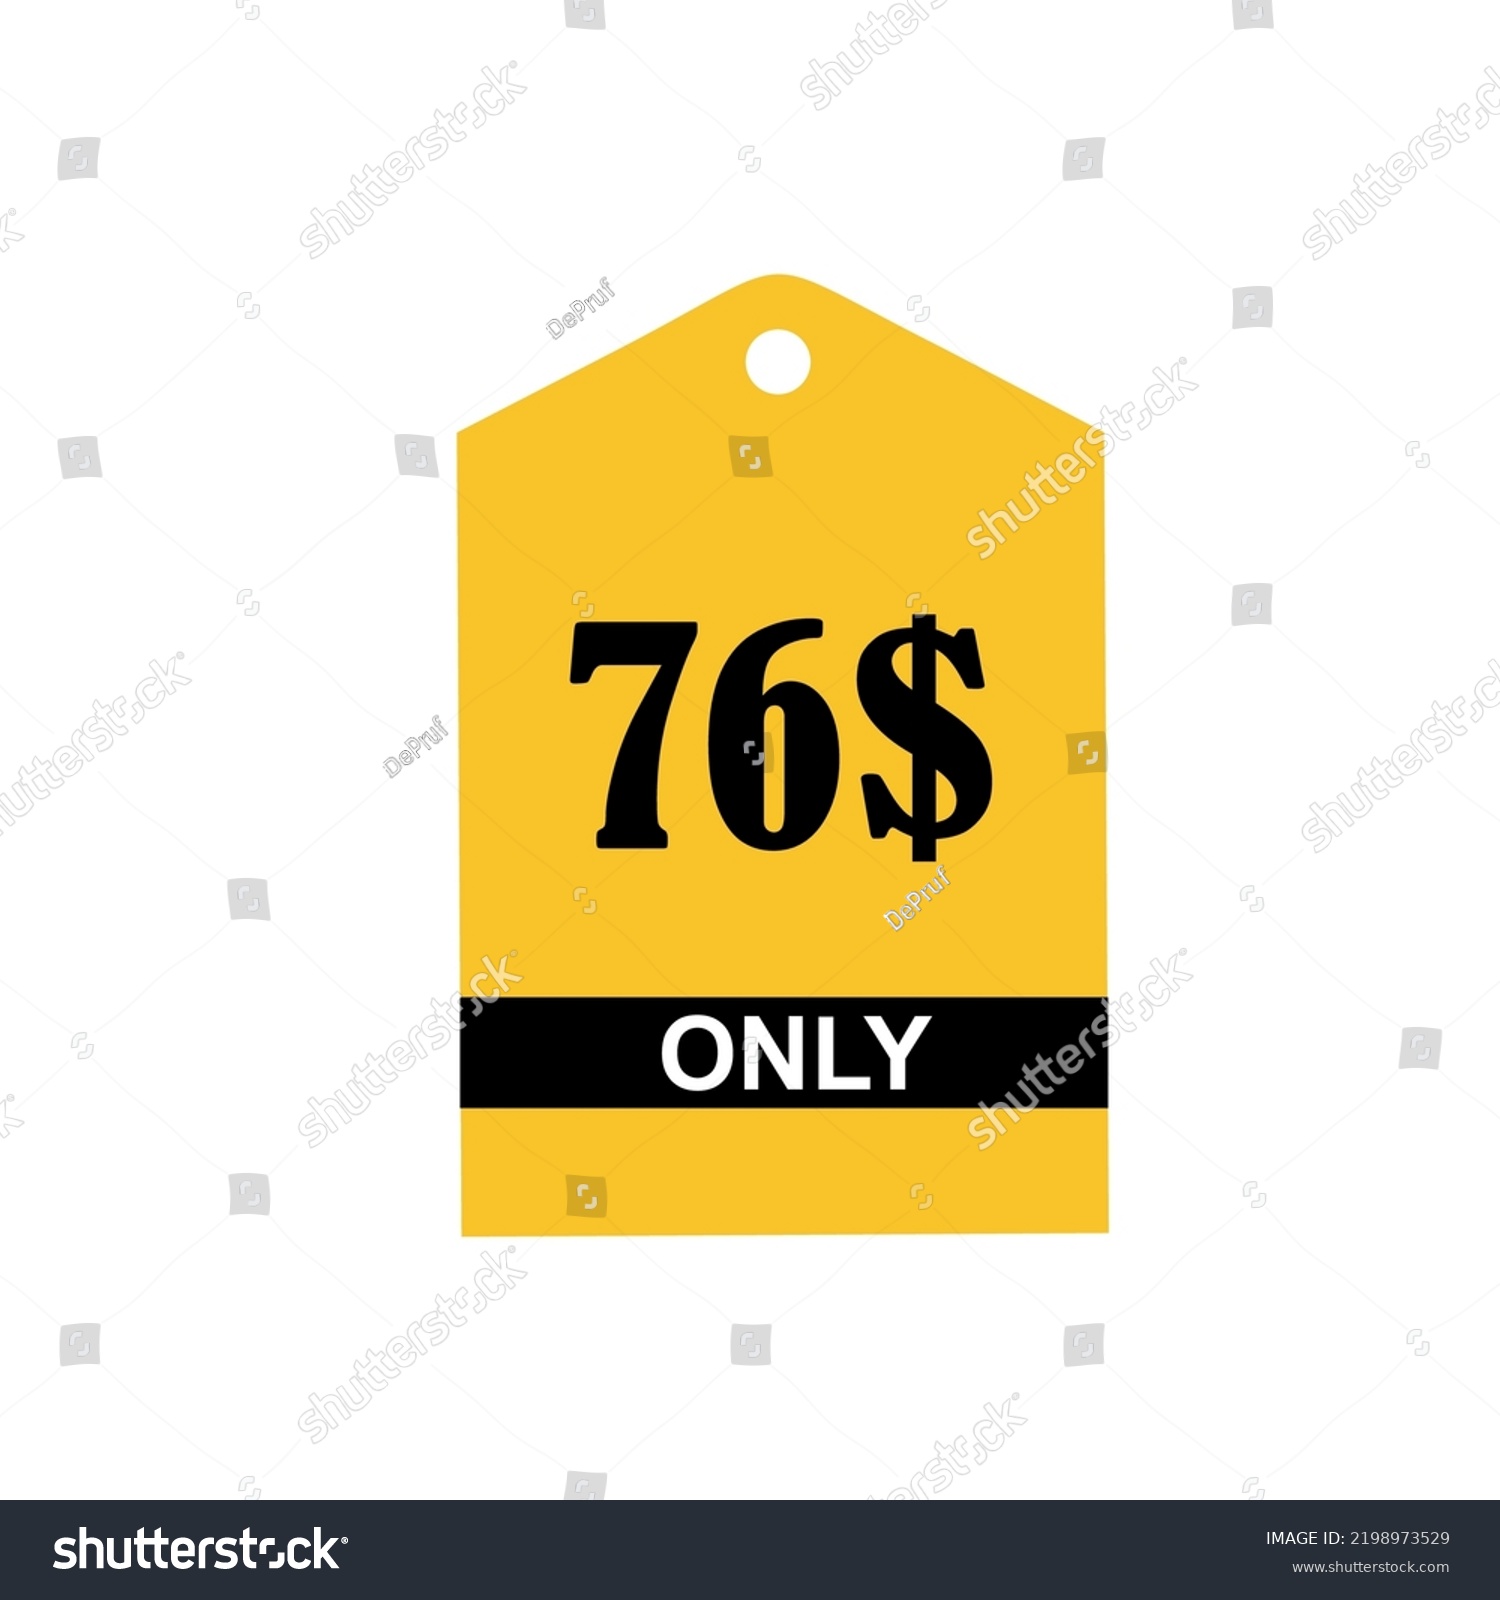 SVG of 76$ Dollar Only Coupon sign or Label or discount voucher Money Saving label, stamp Vector Illustration with fantastic font on yellow background and white background svg